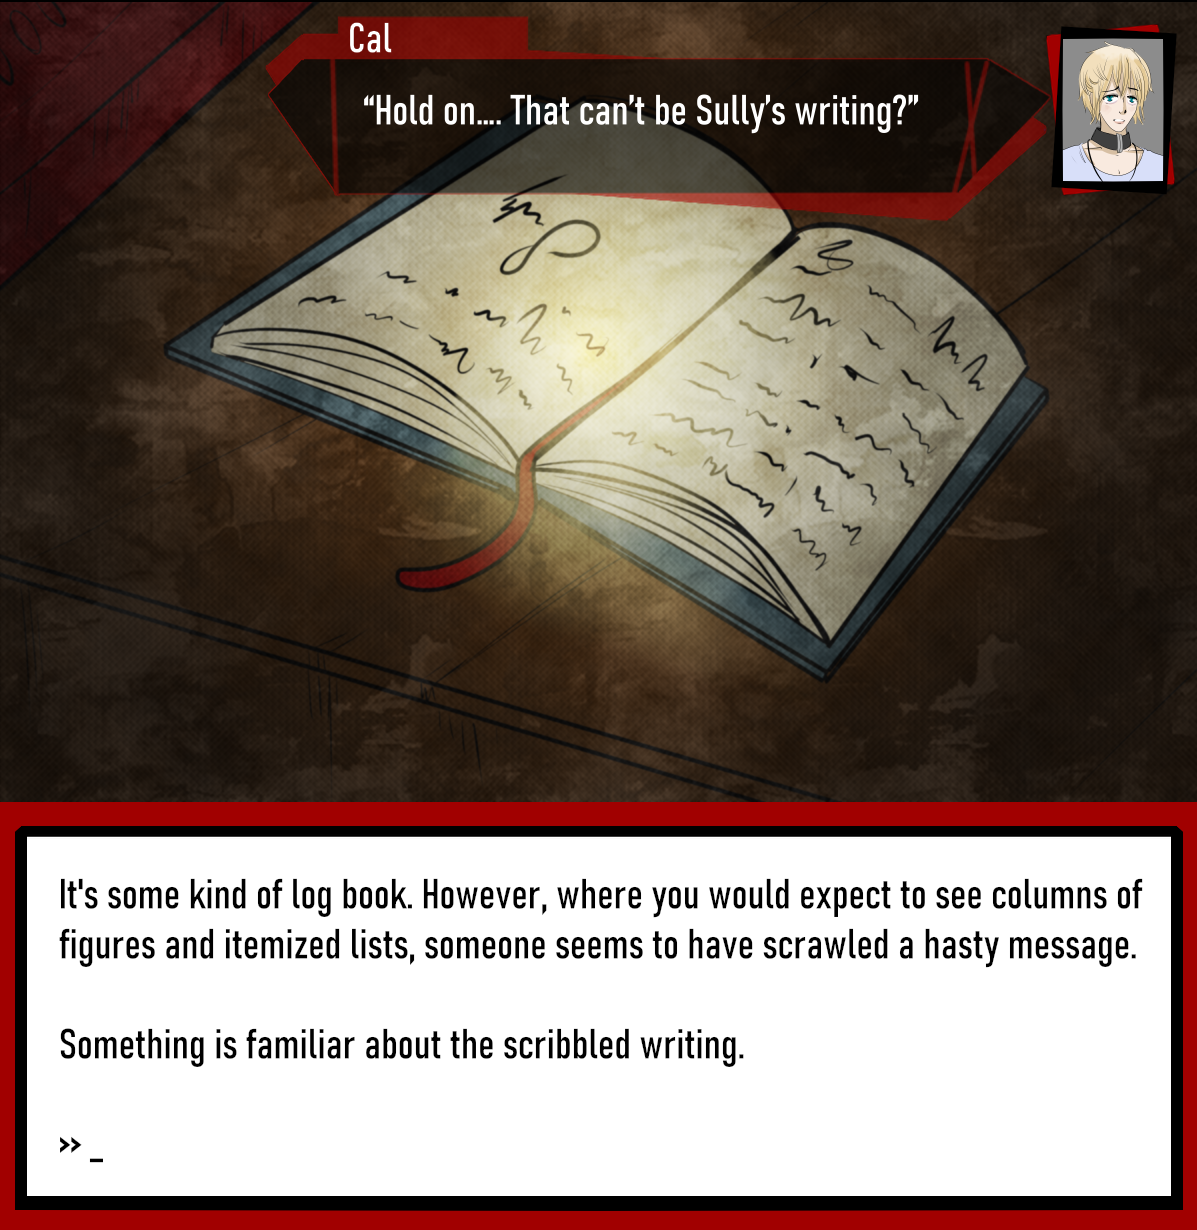 C: “Hold on…. That can’t be Sully’s writing?”

It's some kind of log book. However, where you would expect to see columns of figures and itemized lists, someone seems to have scrawled a hasty message.

Something is familiar about the scribbled writing.

>> _
